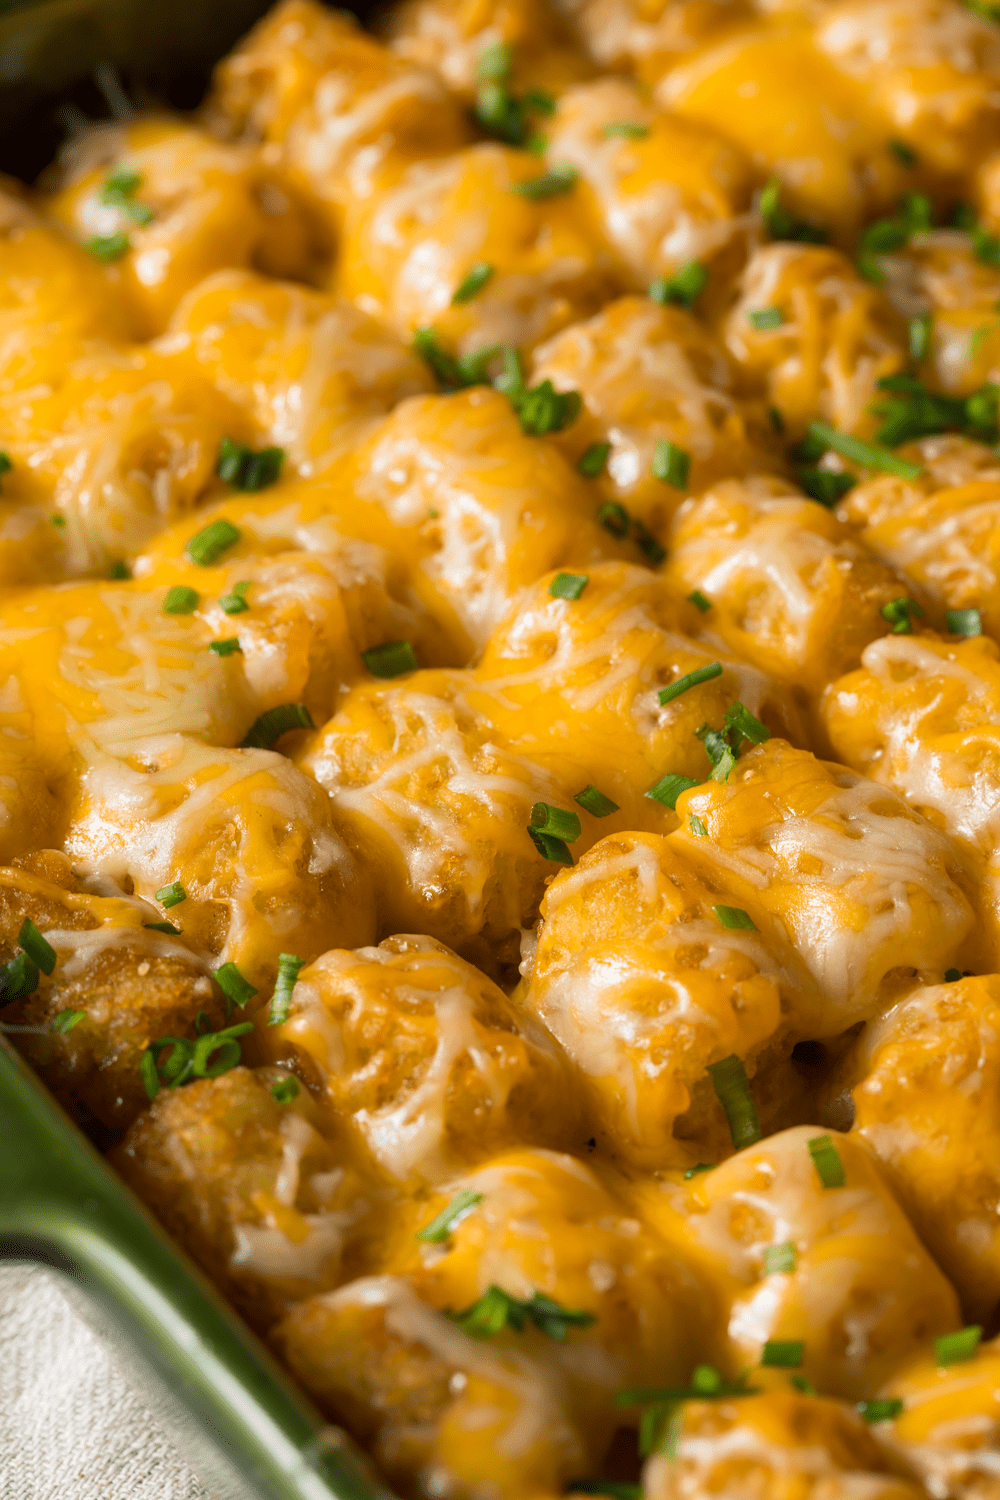 Homemade Tater Tot Casserole with Beef and Cheese